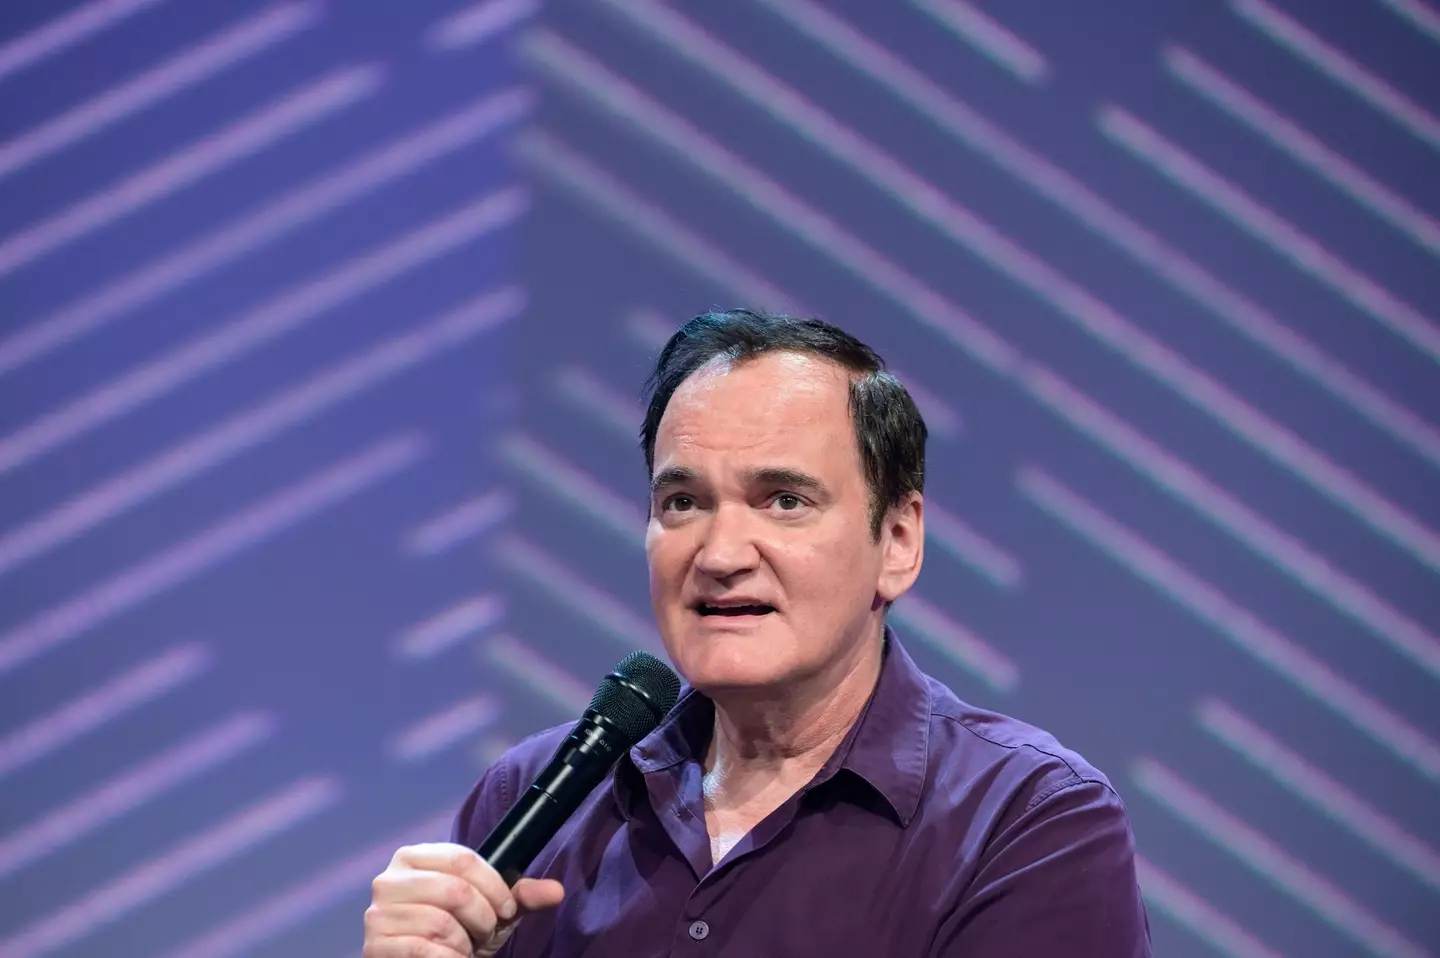 Quentin Tarantino has said why he will never make a Marvel or DC movie.